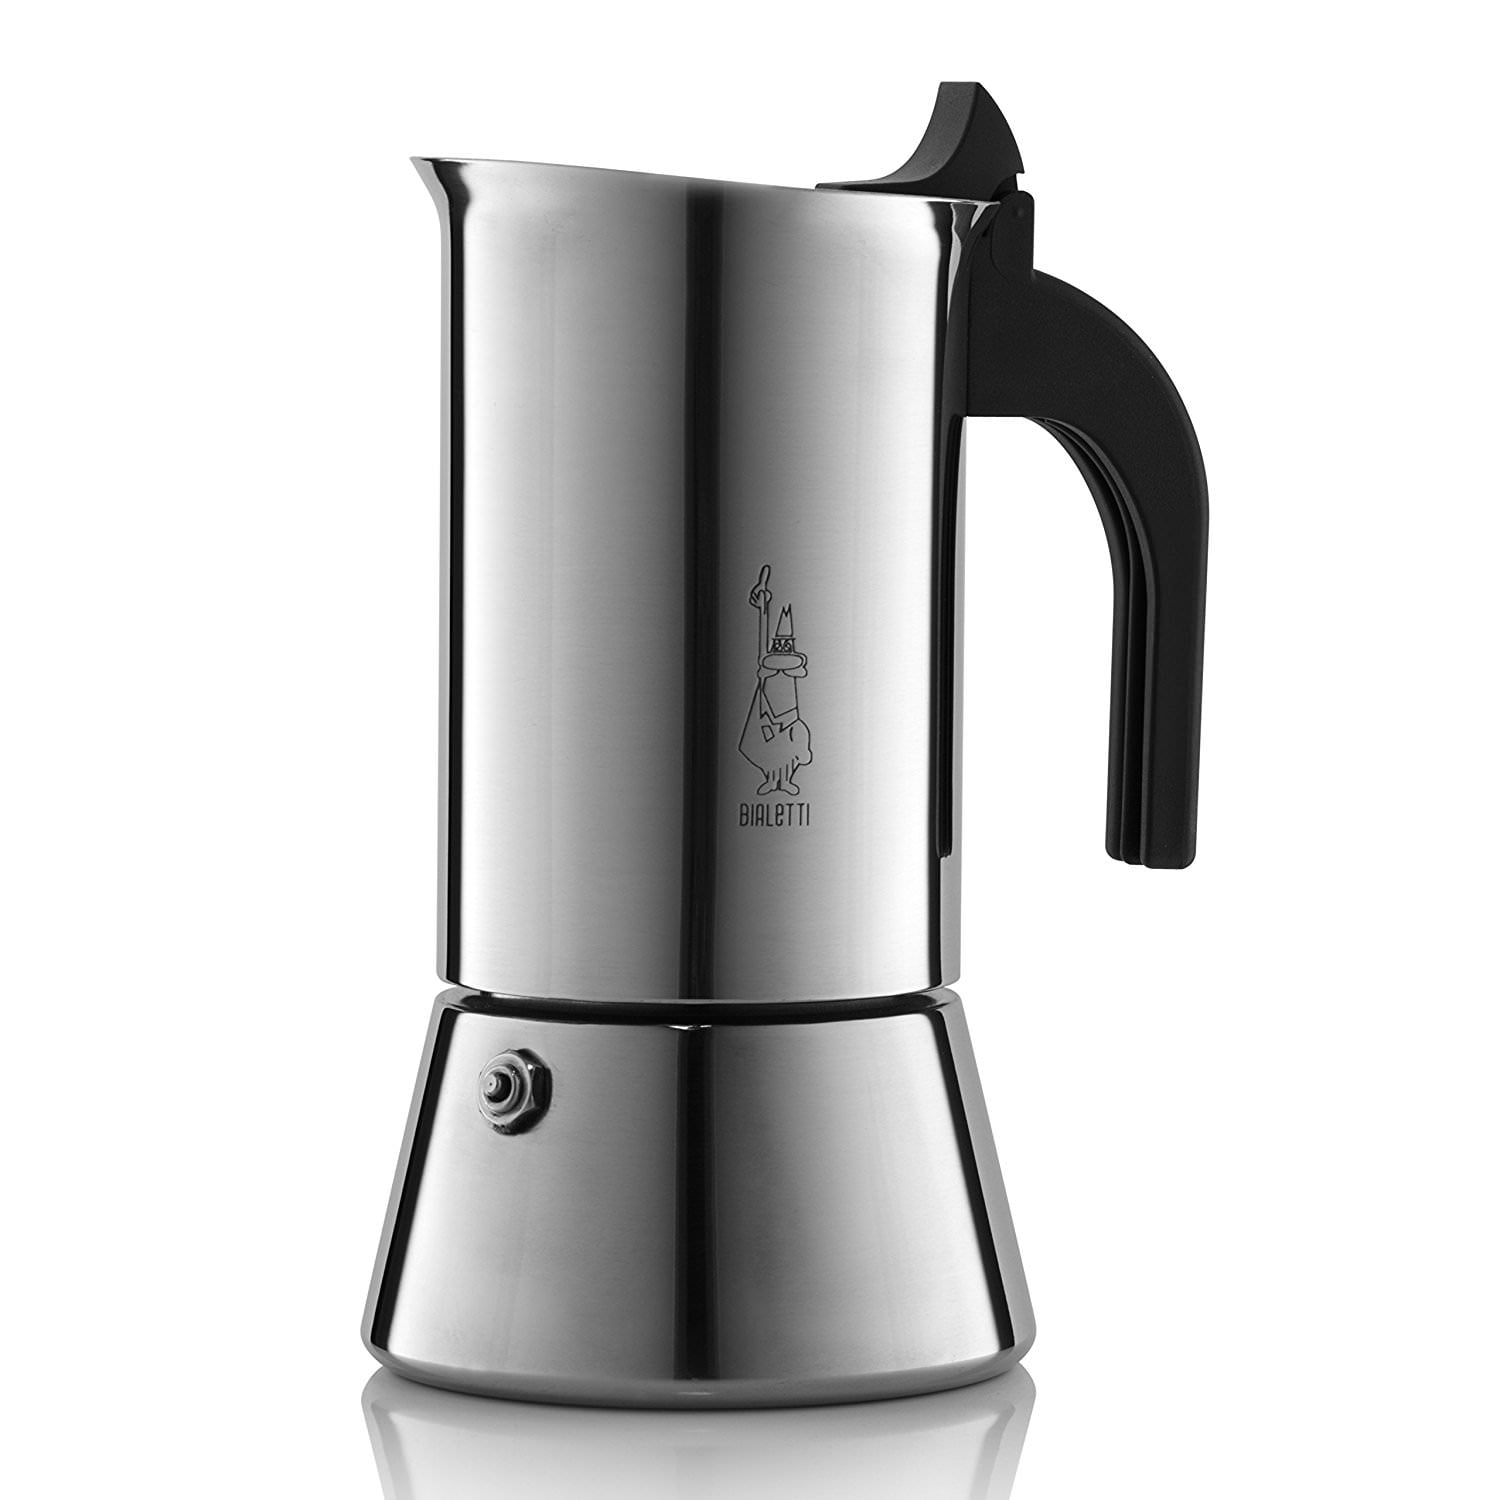 Bialetti Stainless Stove Top Espresso Maker, 4 cup Walmart.com